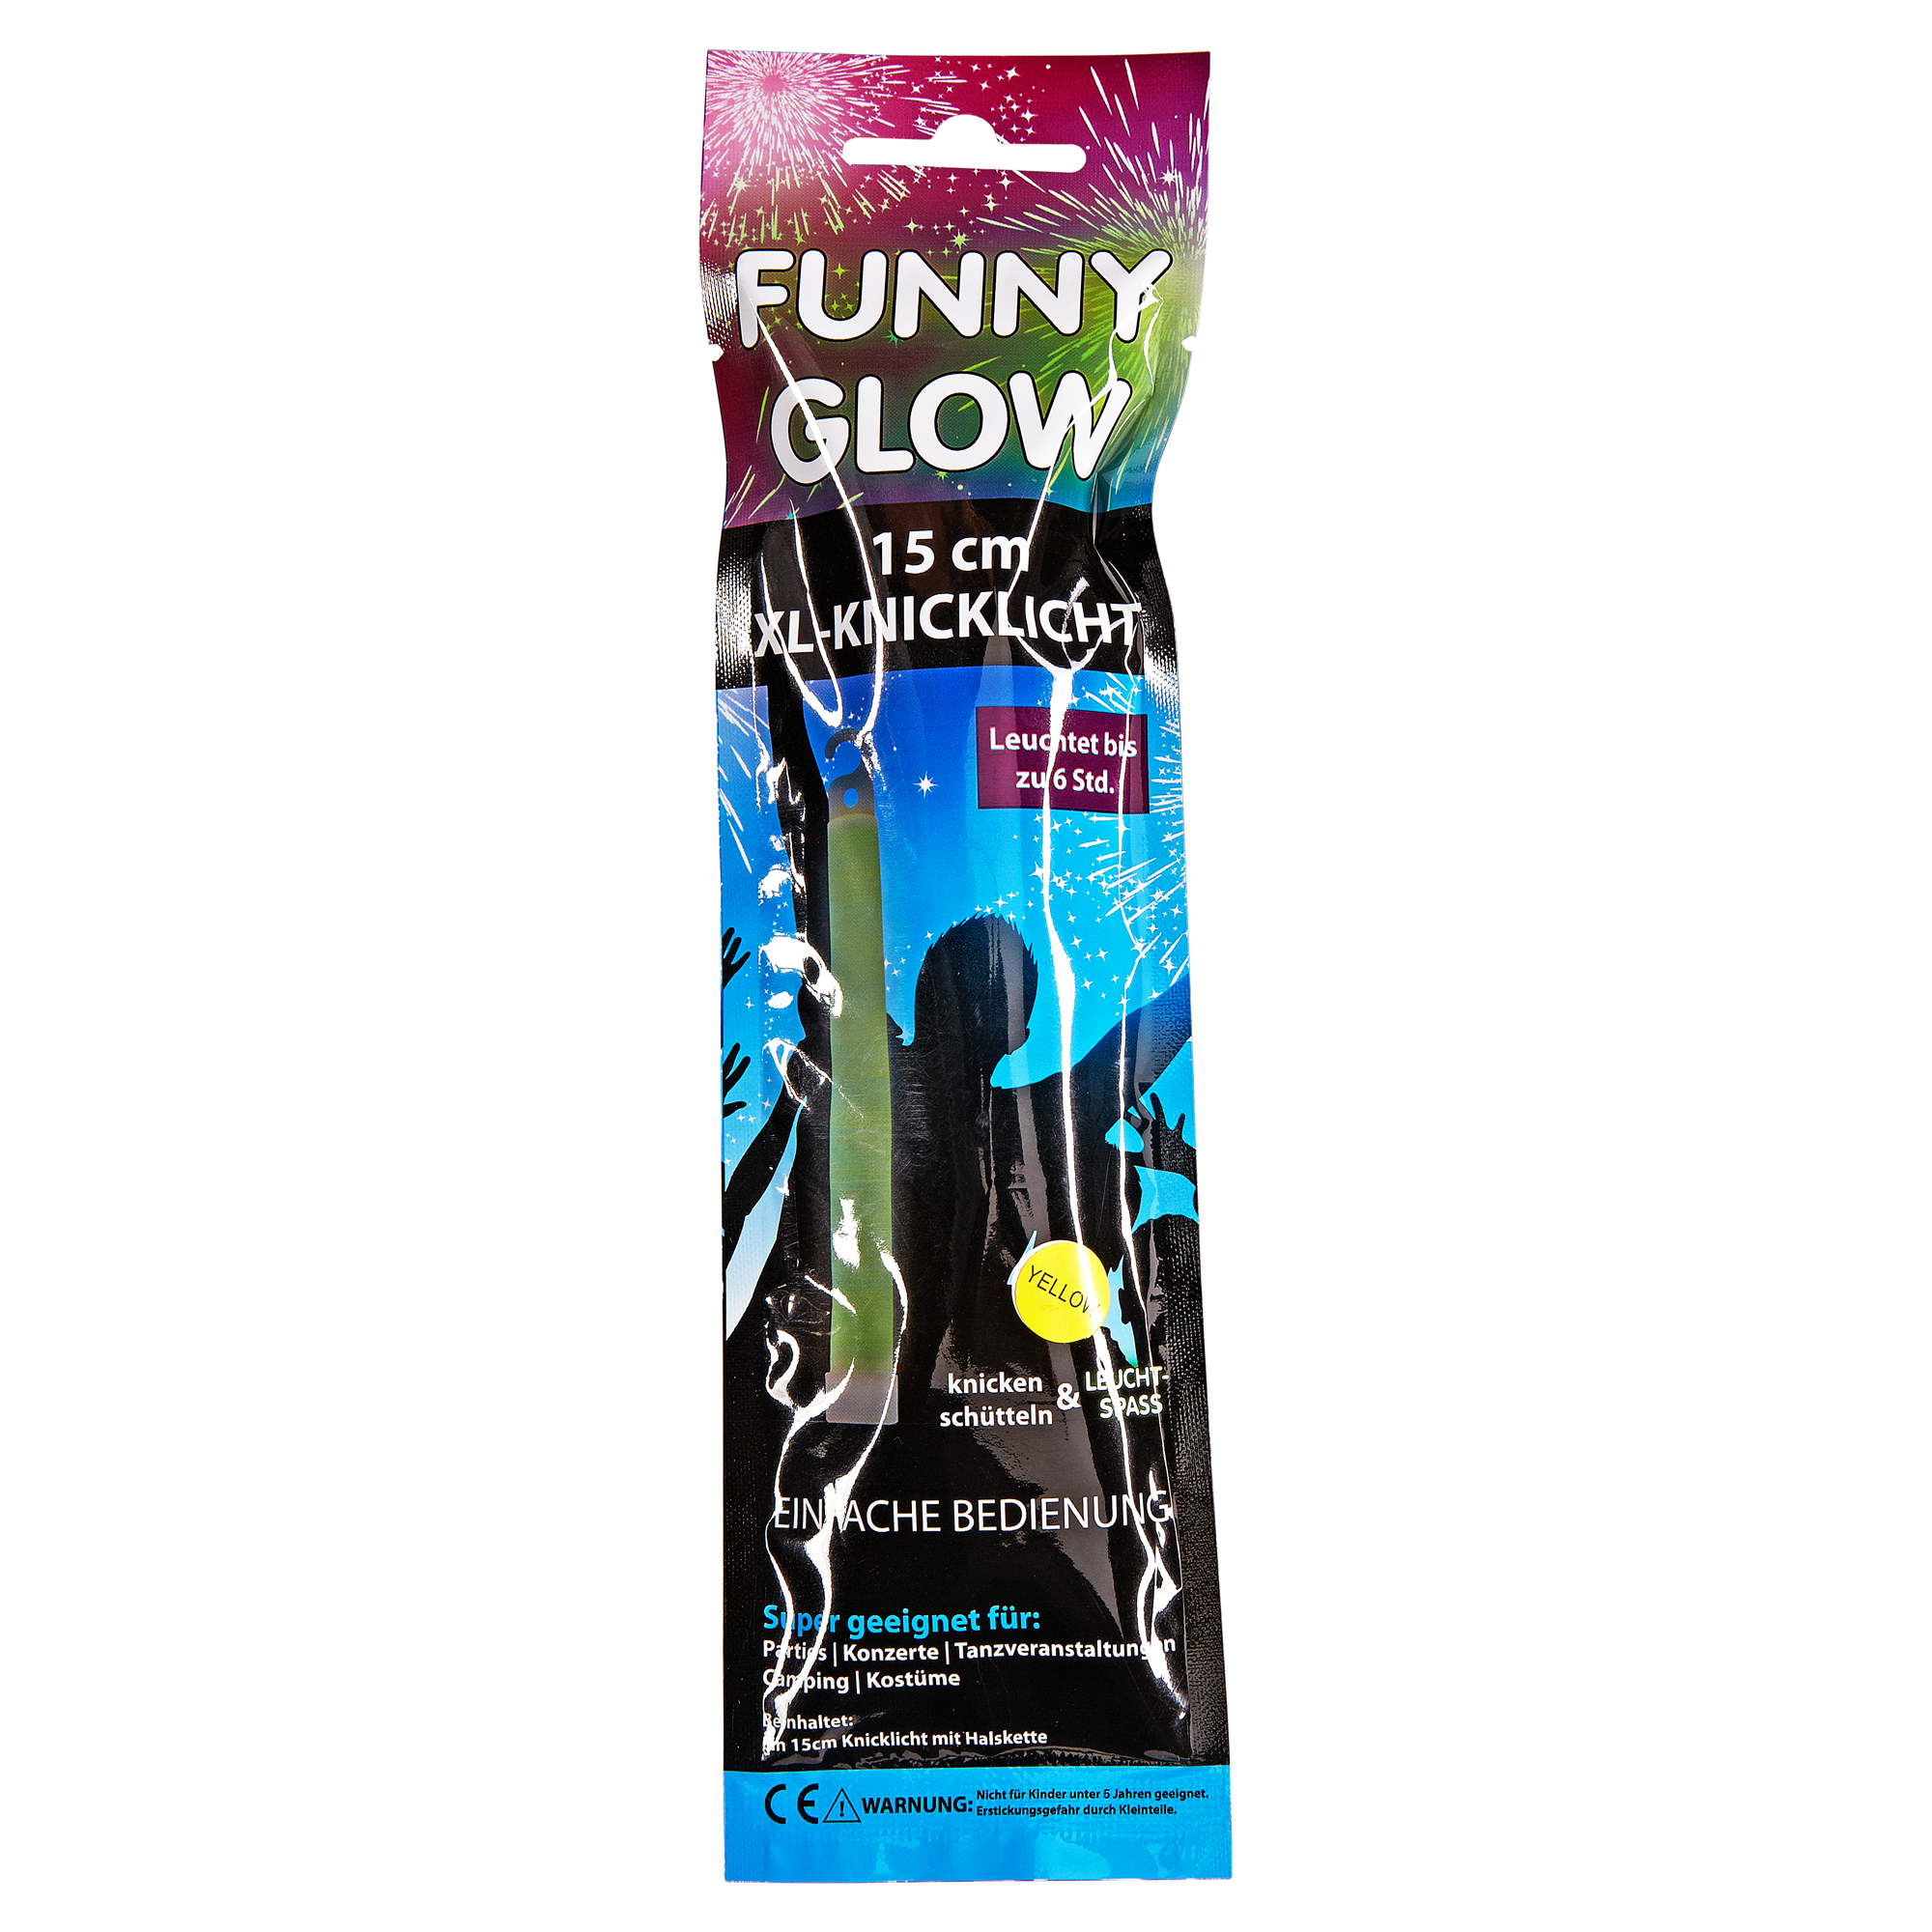 Knicklicht 'Funny Glow' XL + product picture